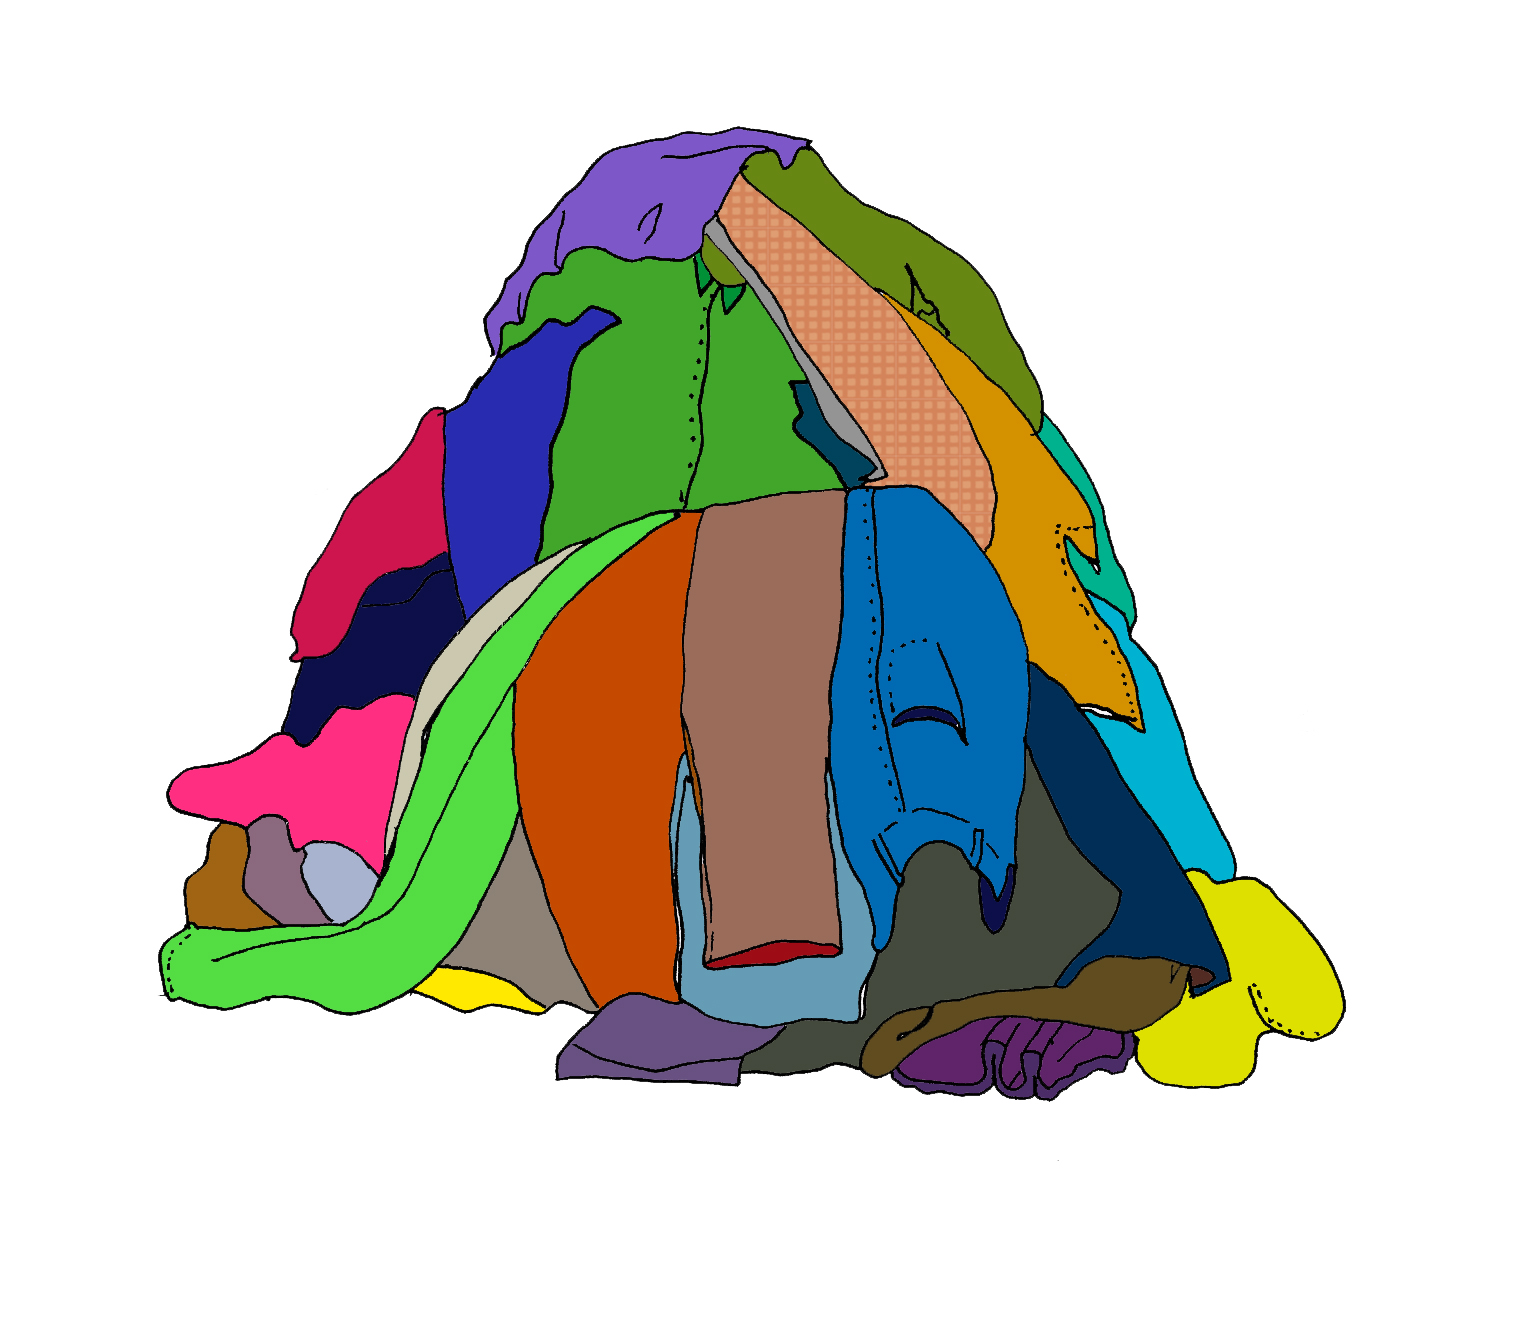 Pile Of Clothes